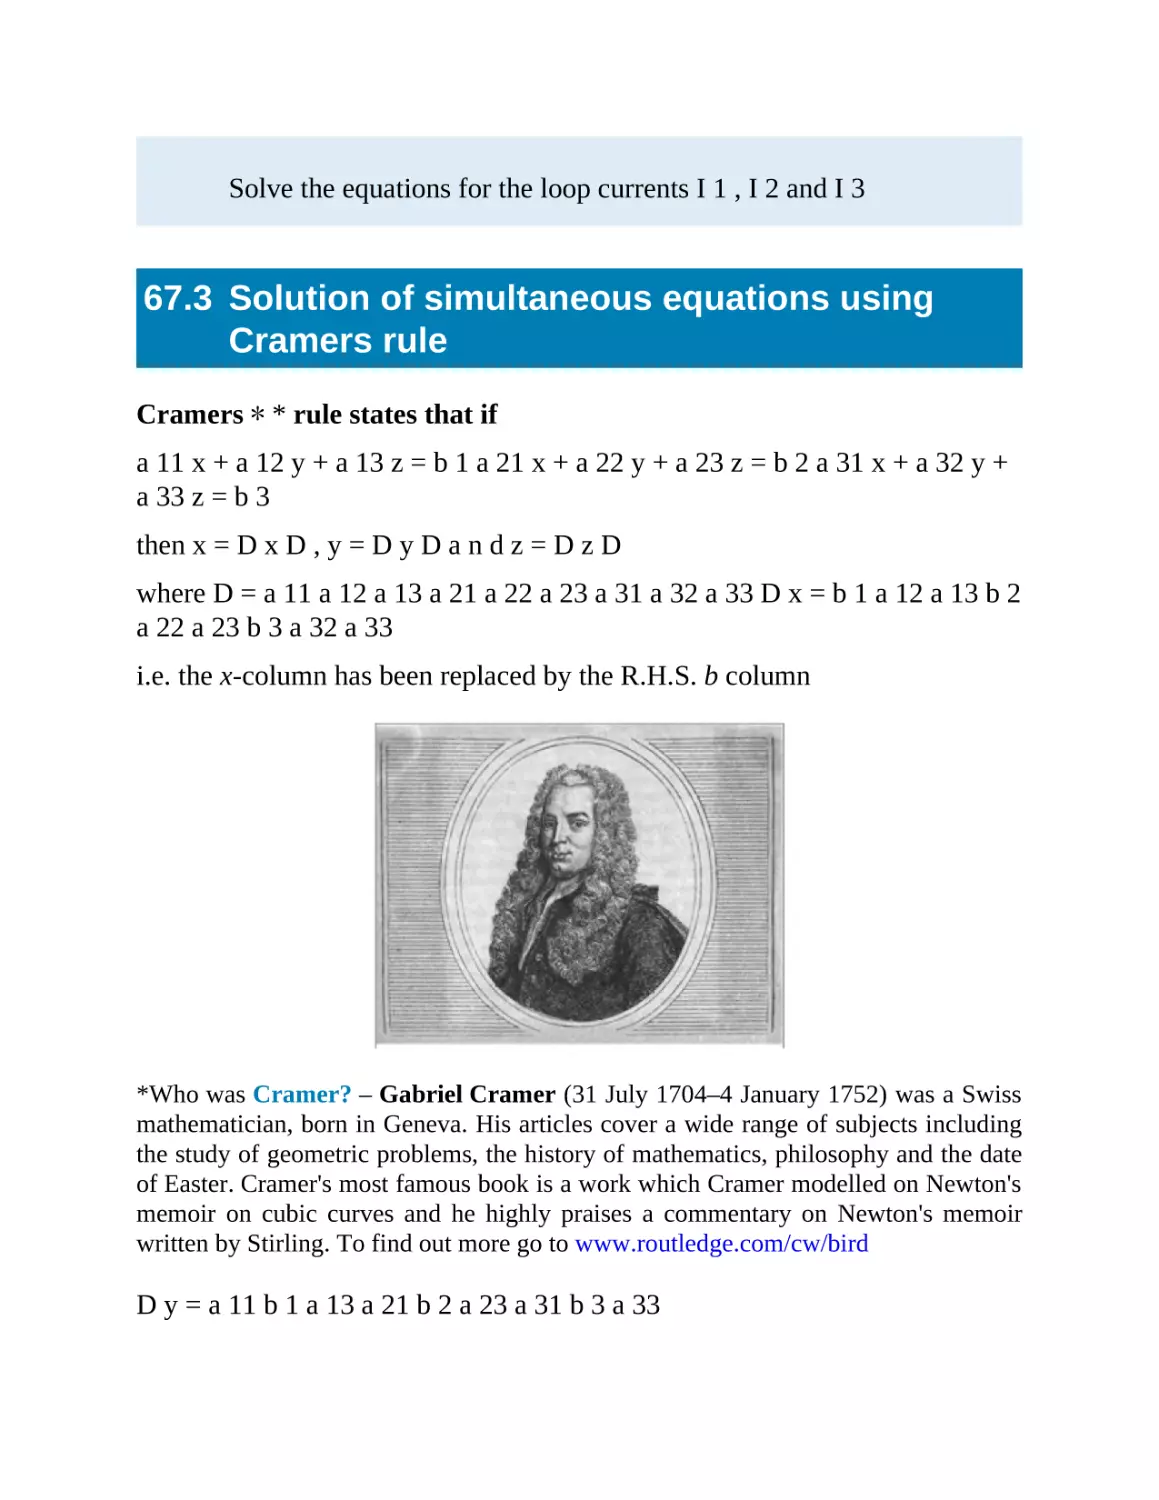 67.3 Solution of simultaneous equations using Cramers rule